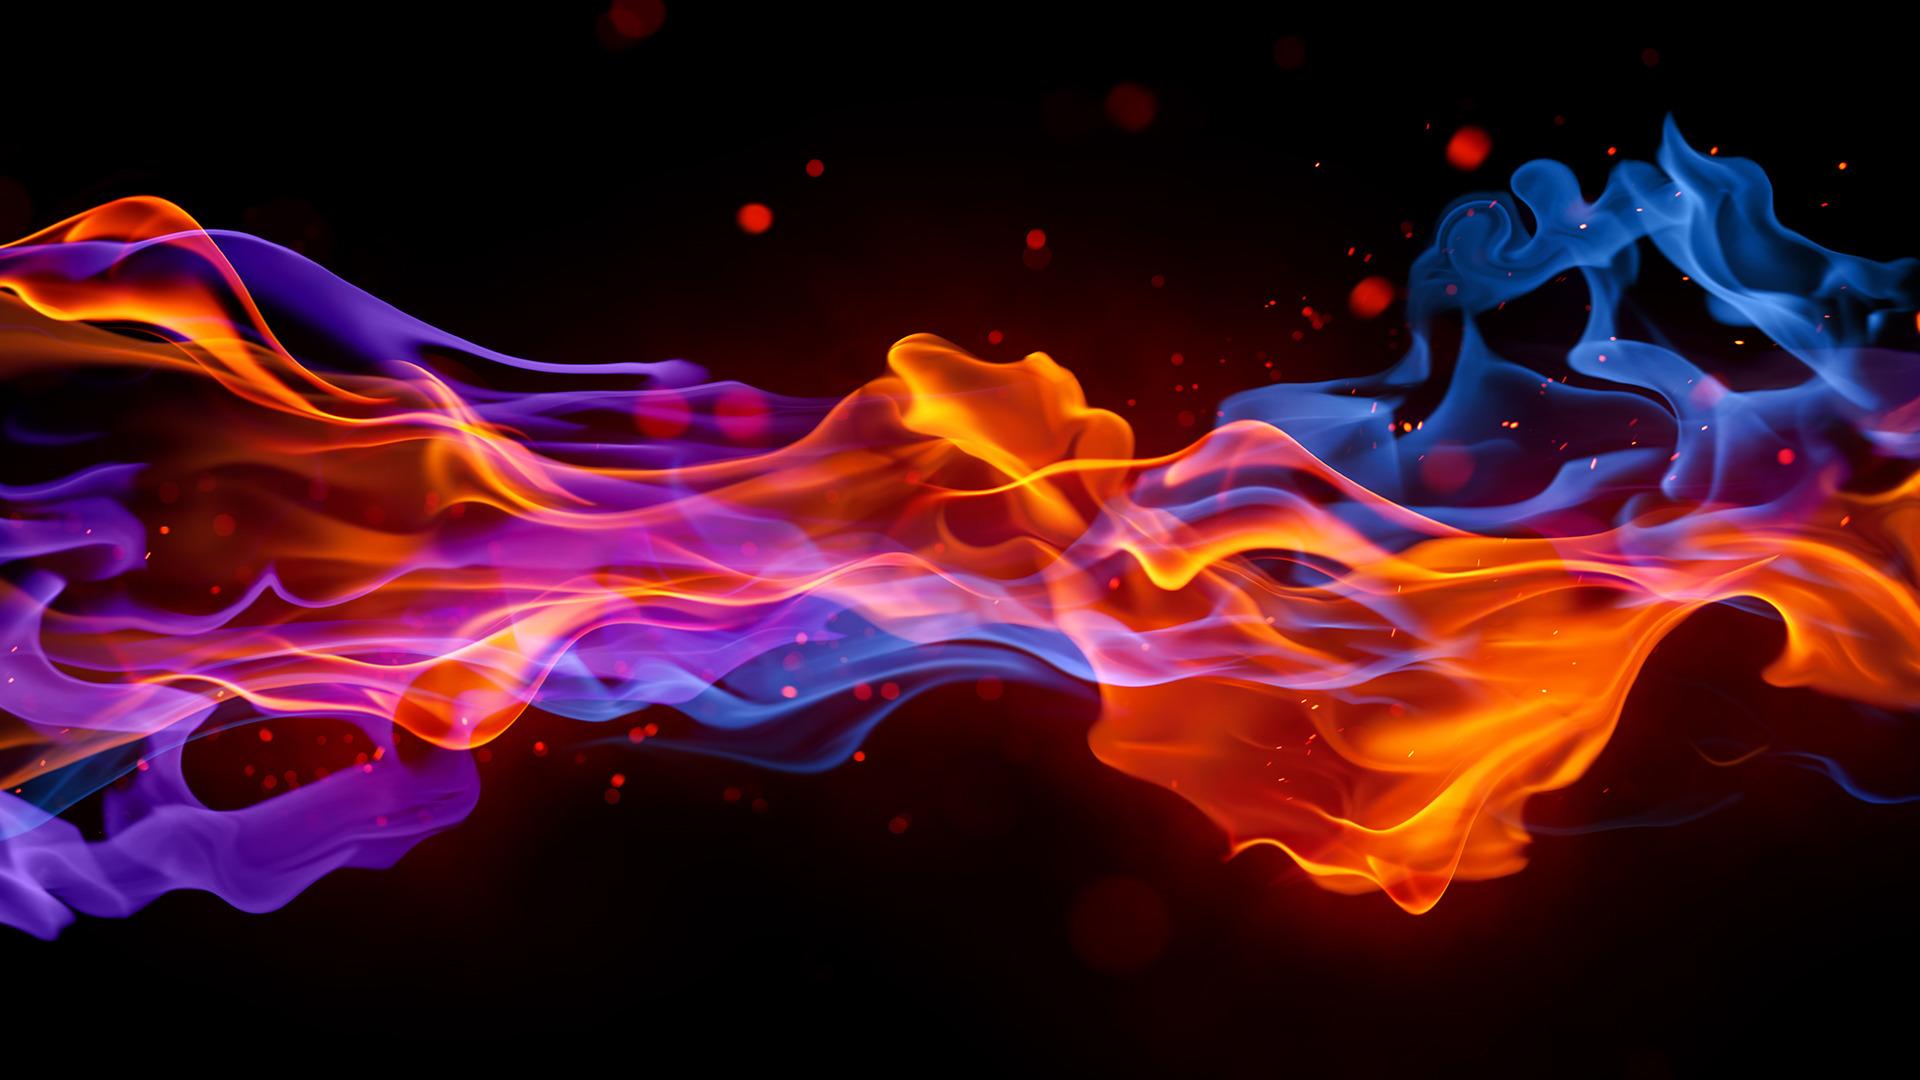 Flame Desktop Wallpaper, Flame Images Free, New Backgrounds